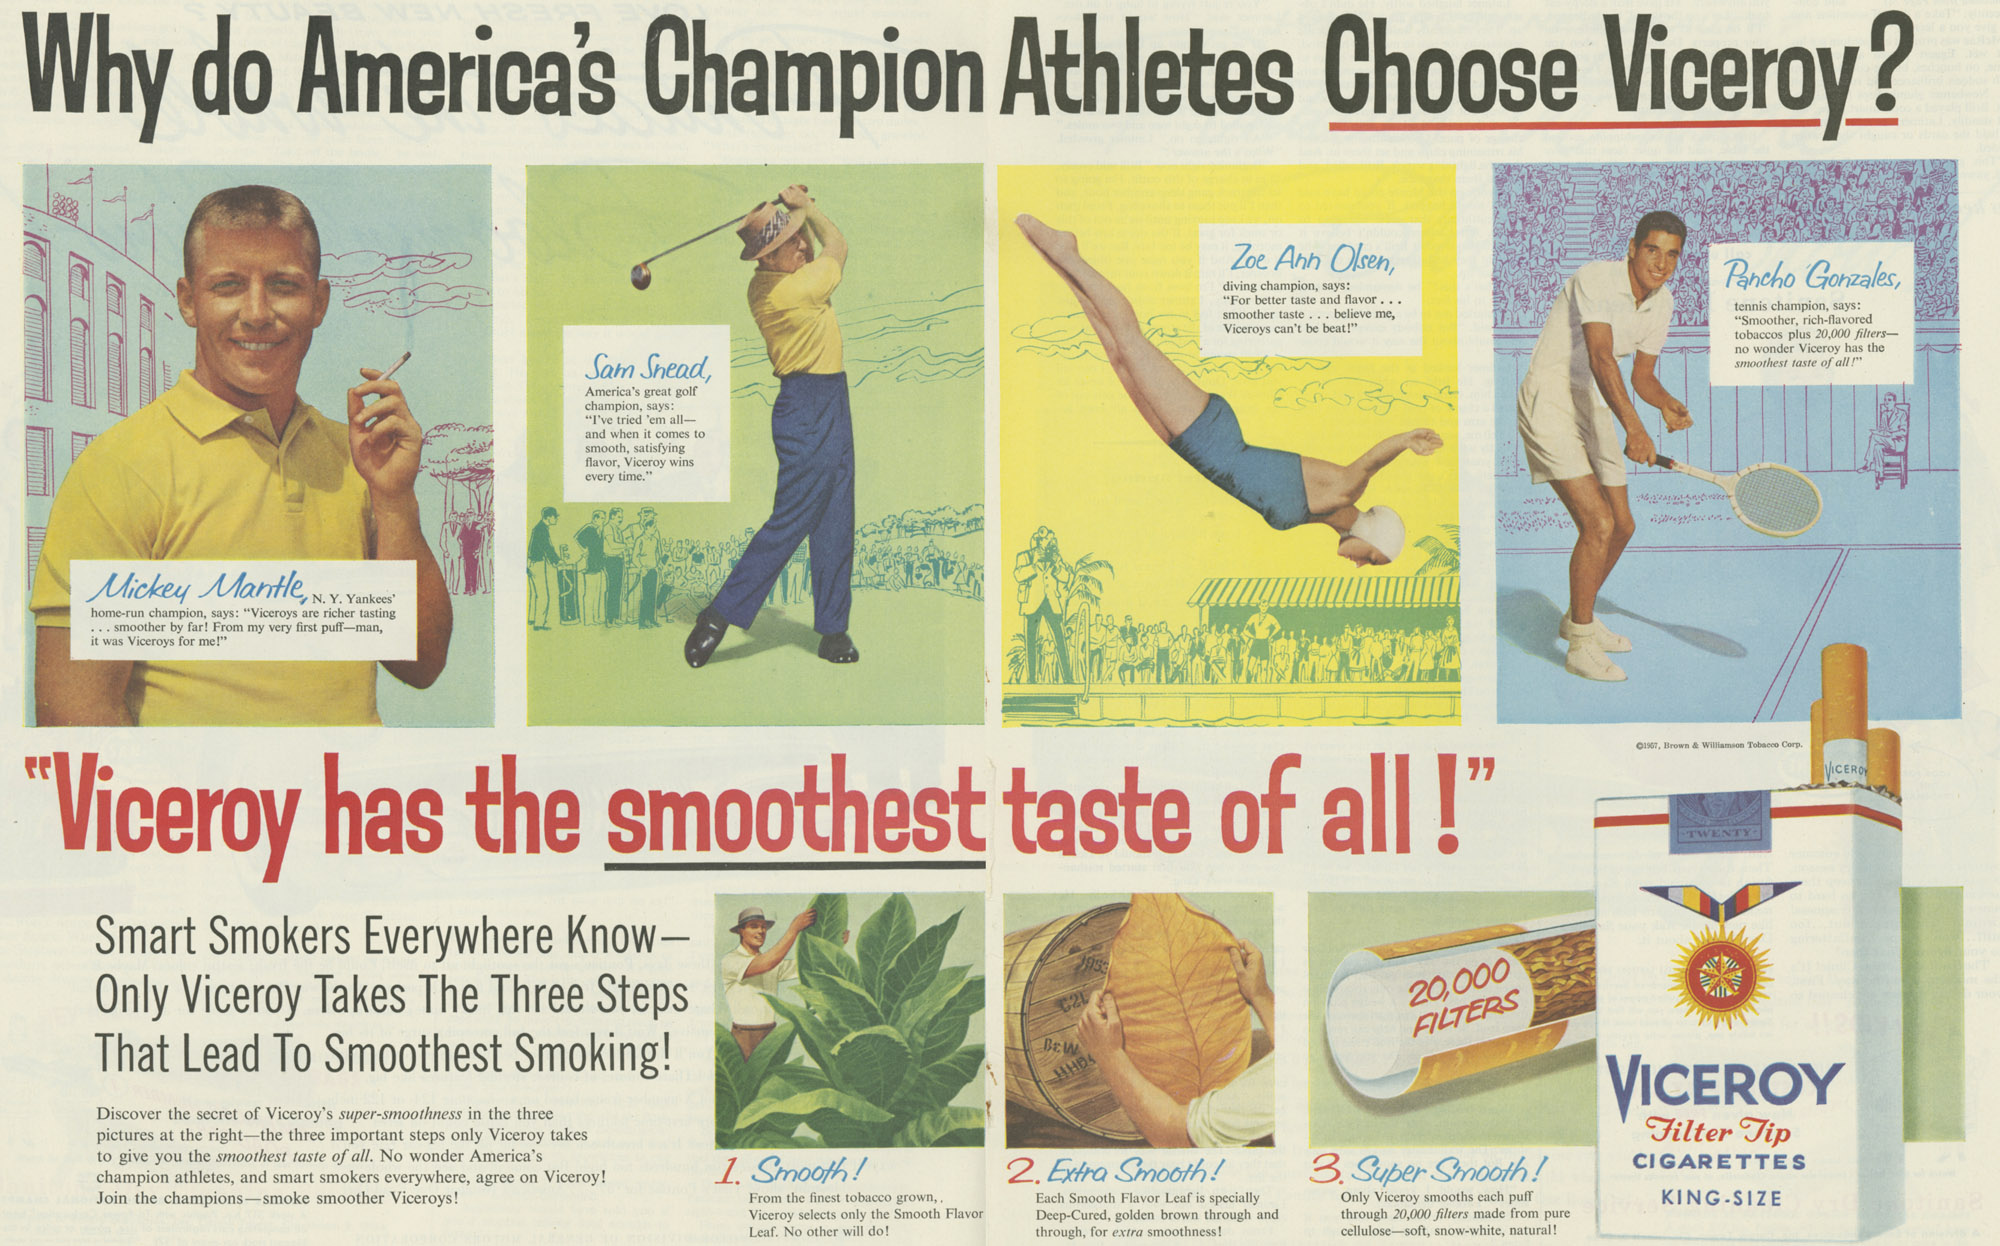 1957 cigarette advertisement for Viceroy cigarettes, with Mickey Mantle, Sam Snead, Zoe Ann Olsen and Pancho Gonzales